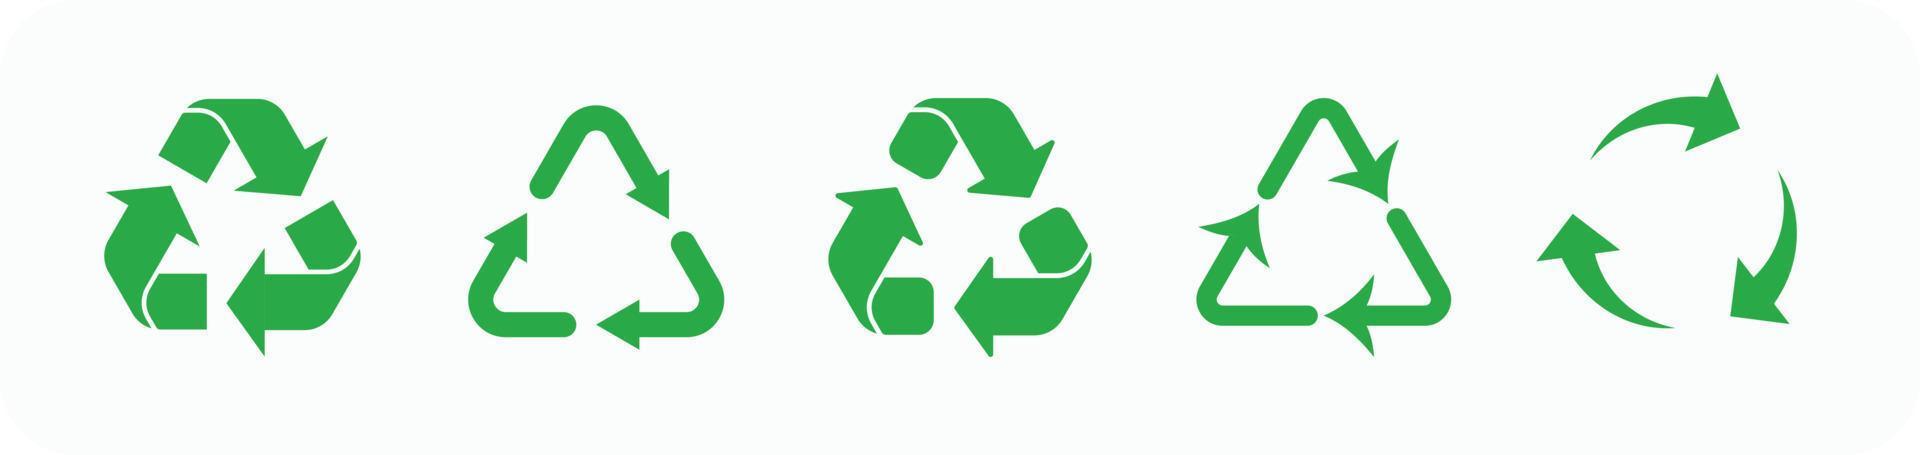 Ecology recycle Symbol set EPS10 - Vector